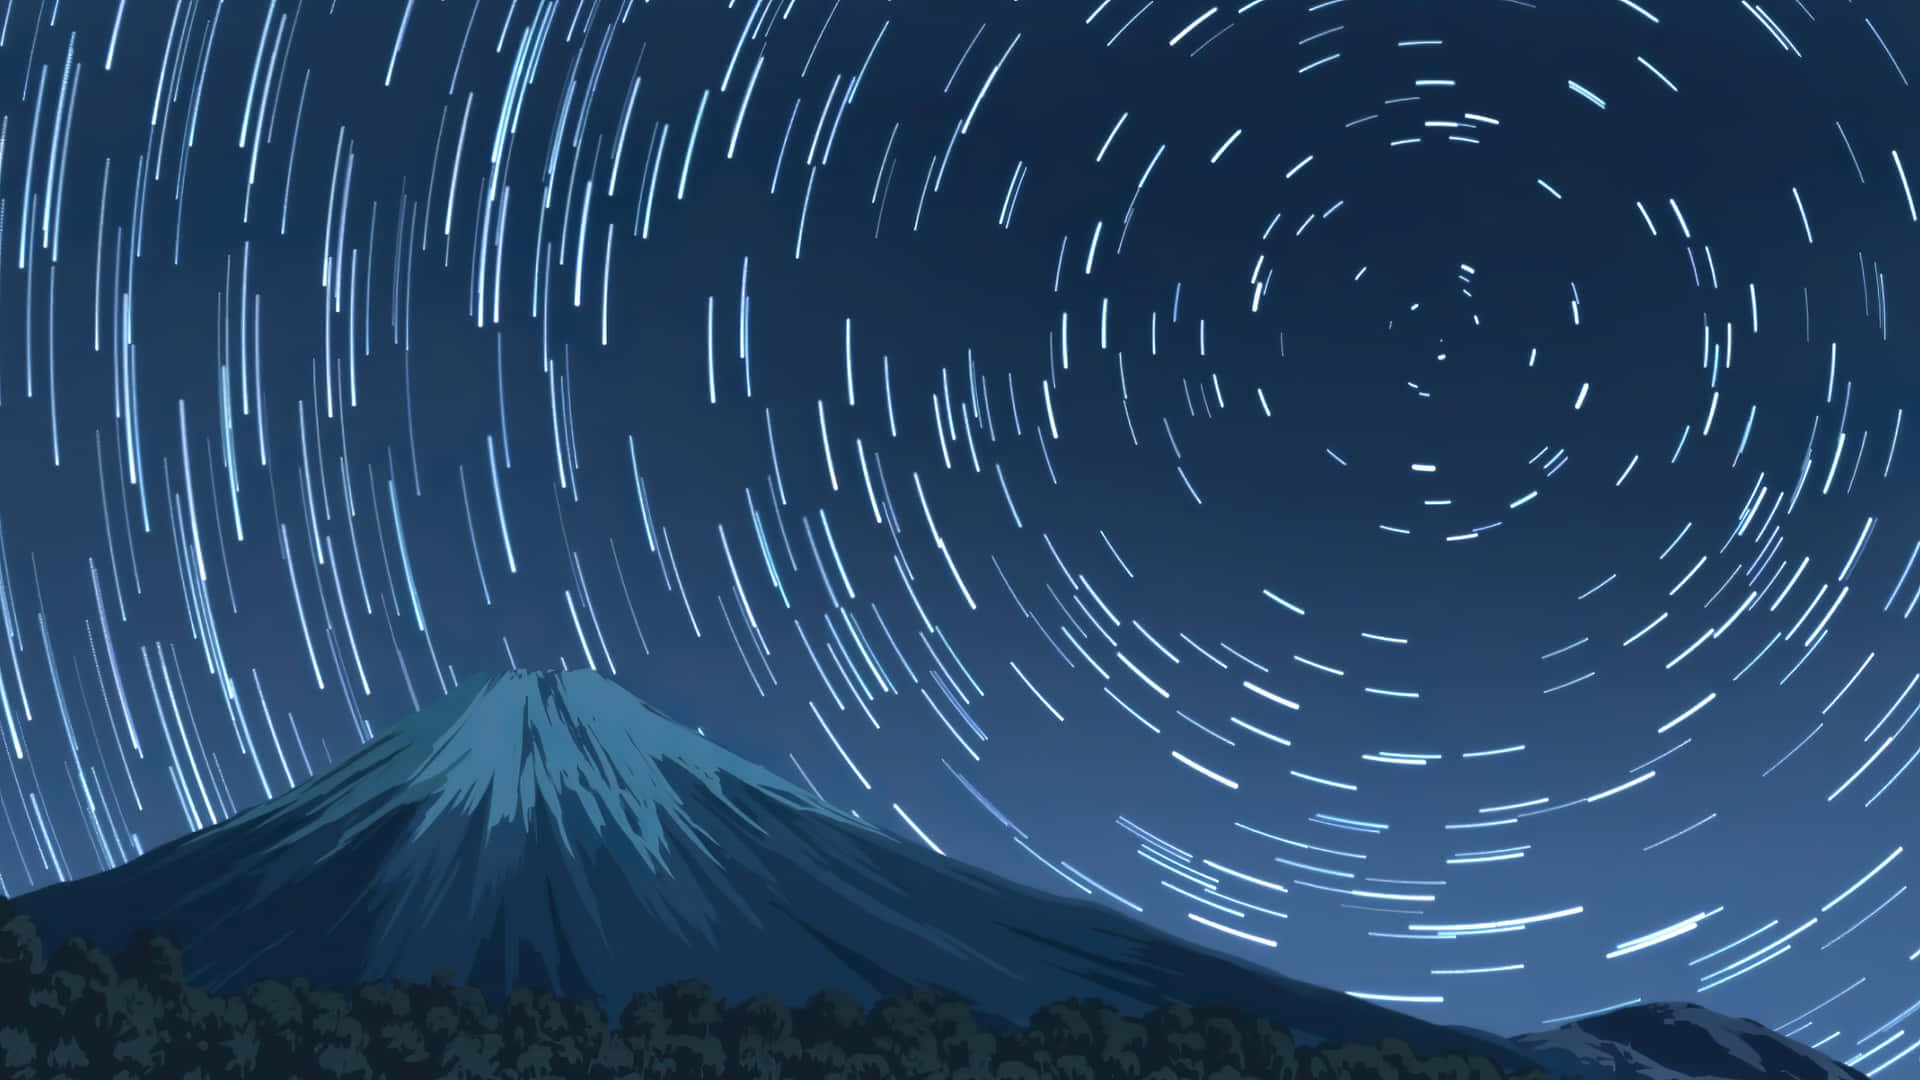 Camp Camp Mountain And Star Trails Background